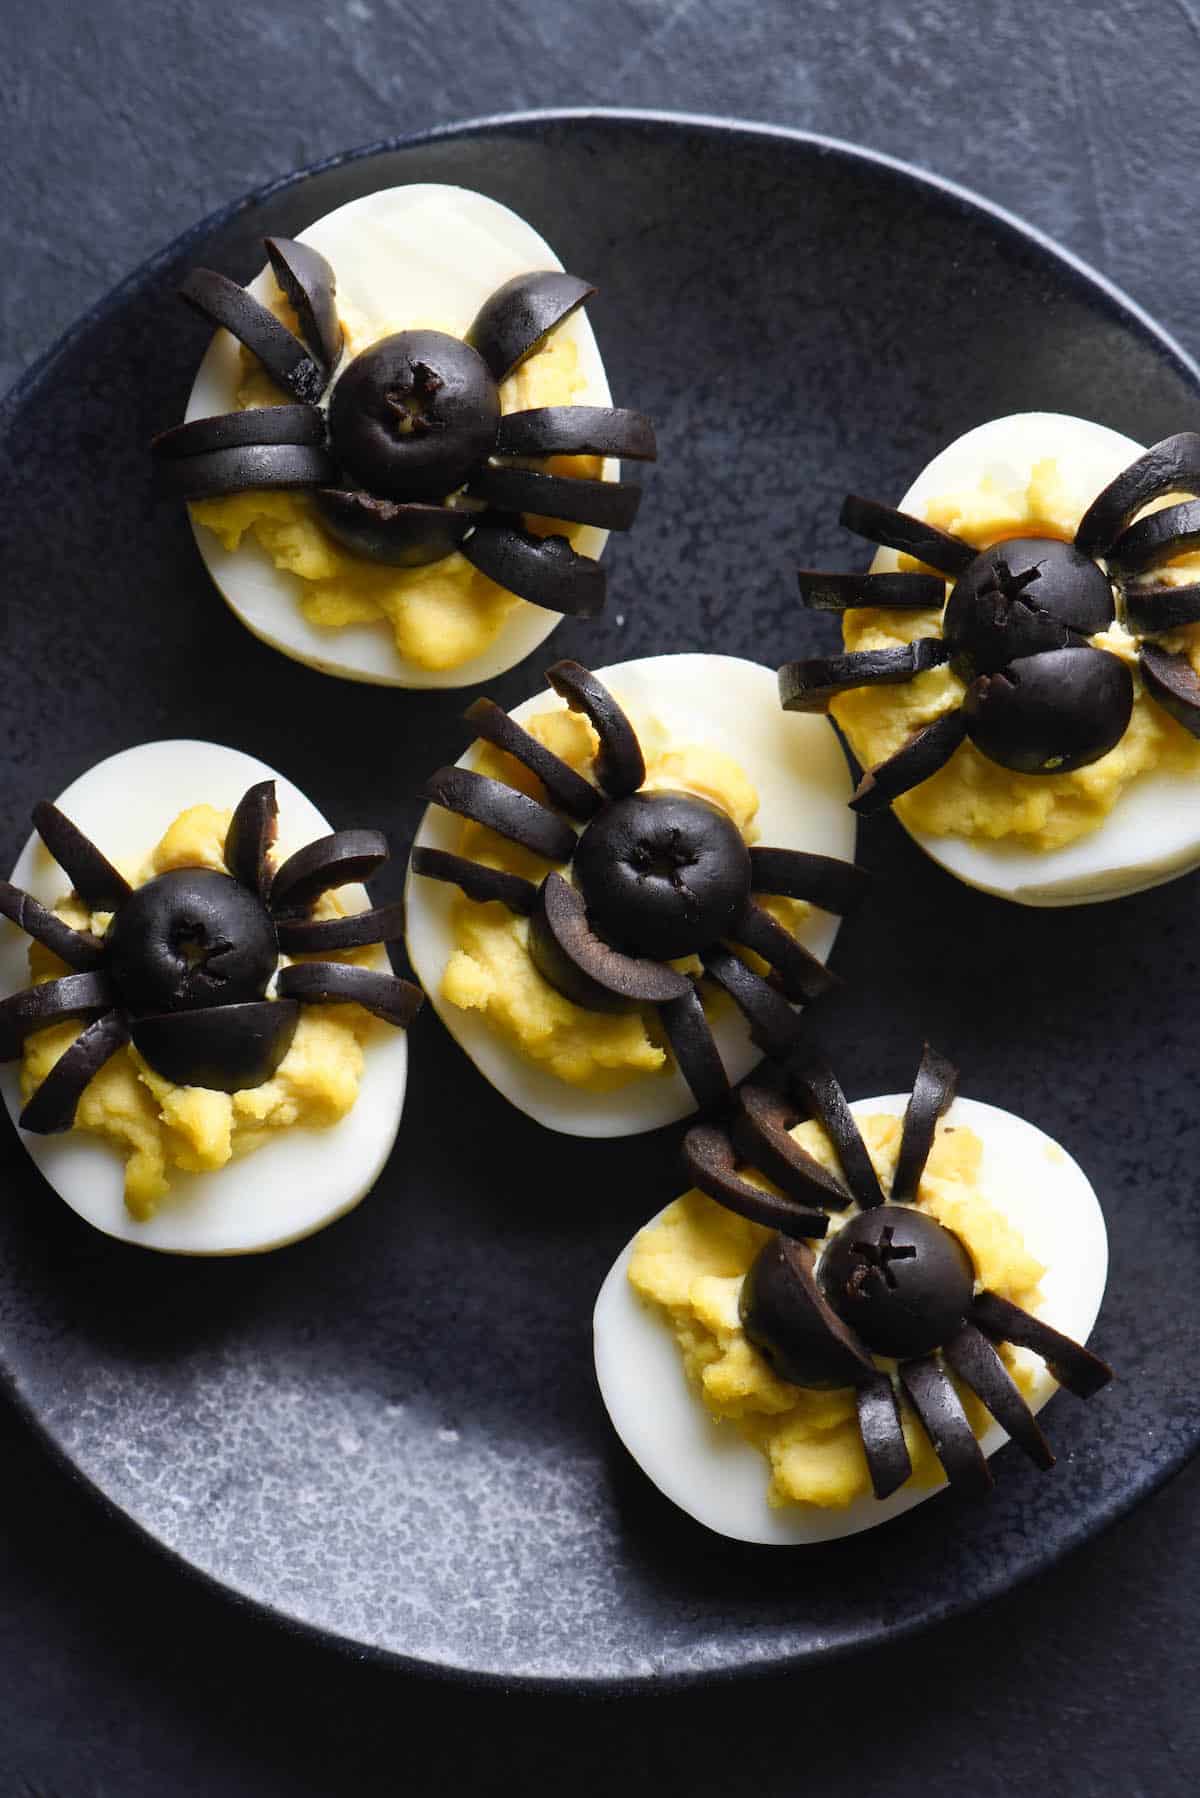 Black plate with spider deviled eggs on top. Black olives are cut into the shape of spiders to decorate the tops of the eggs.